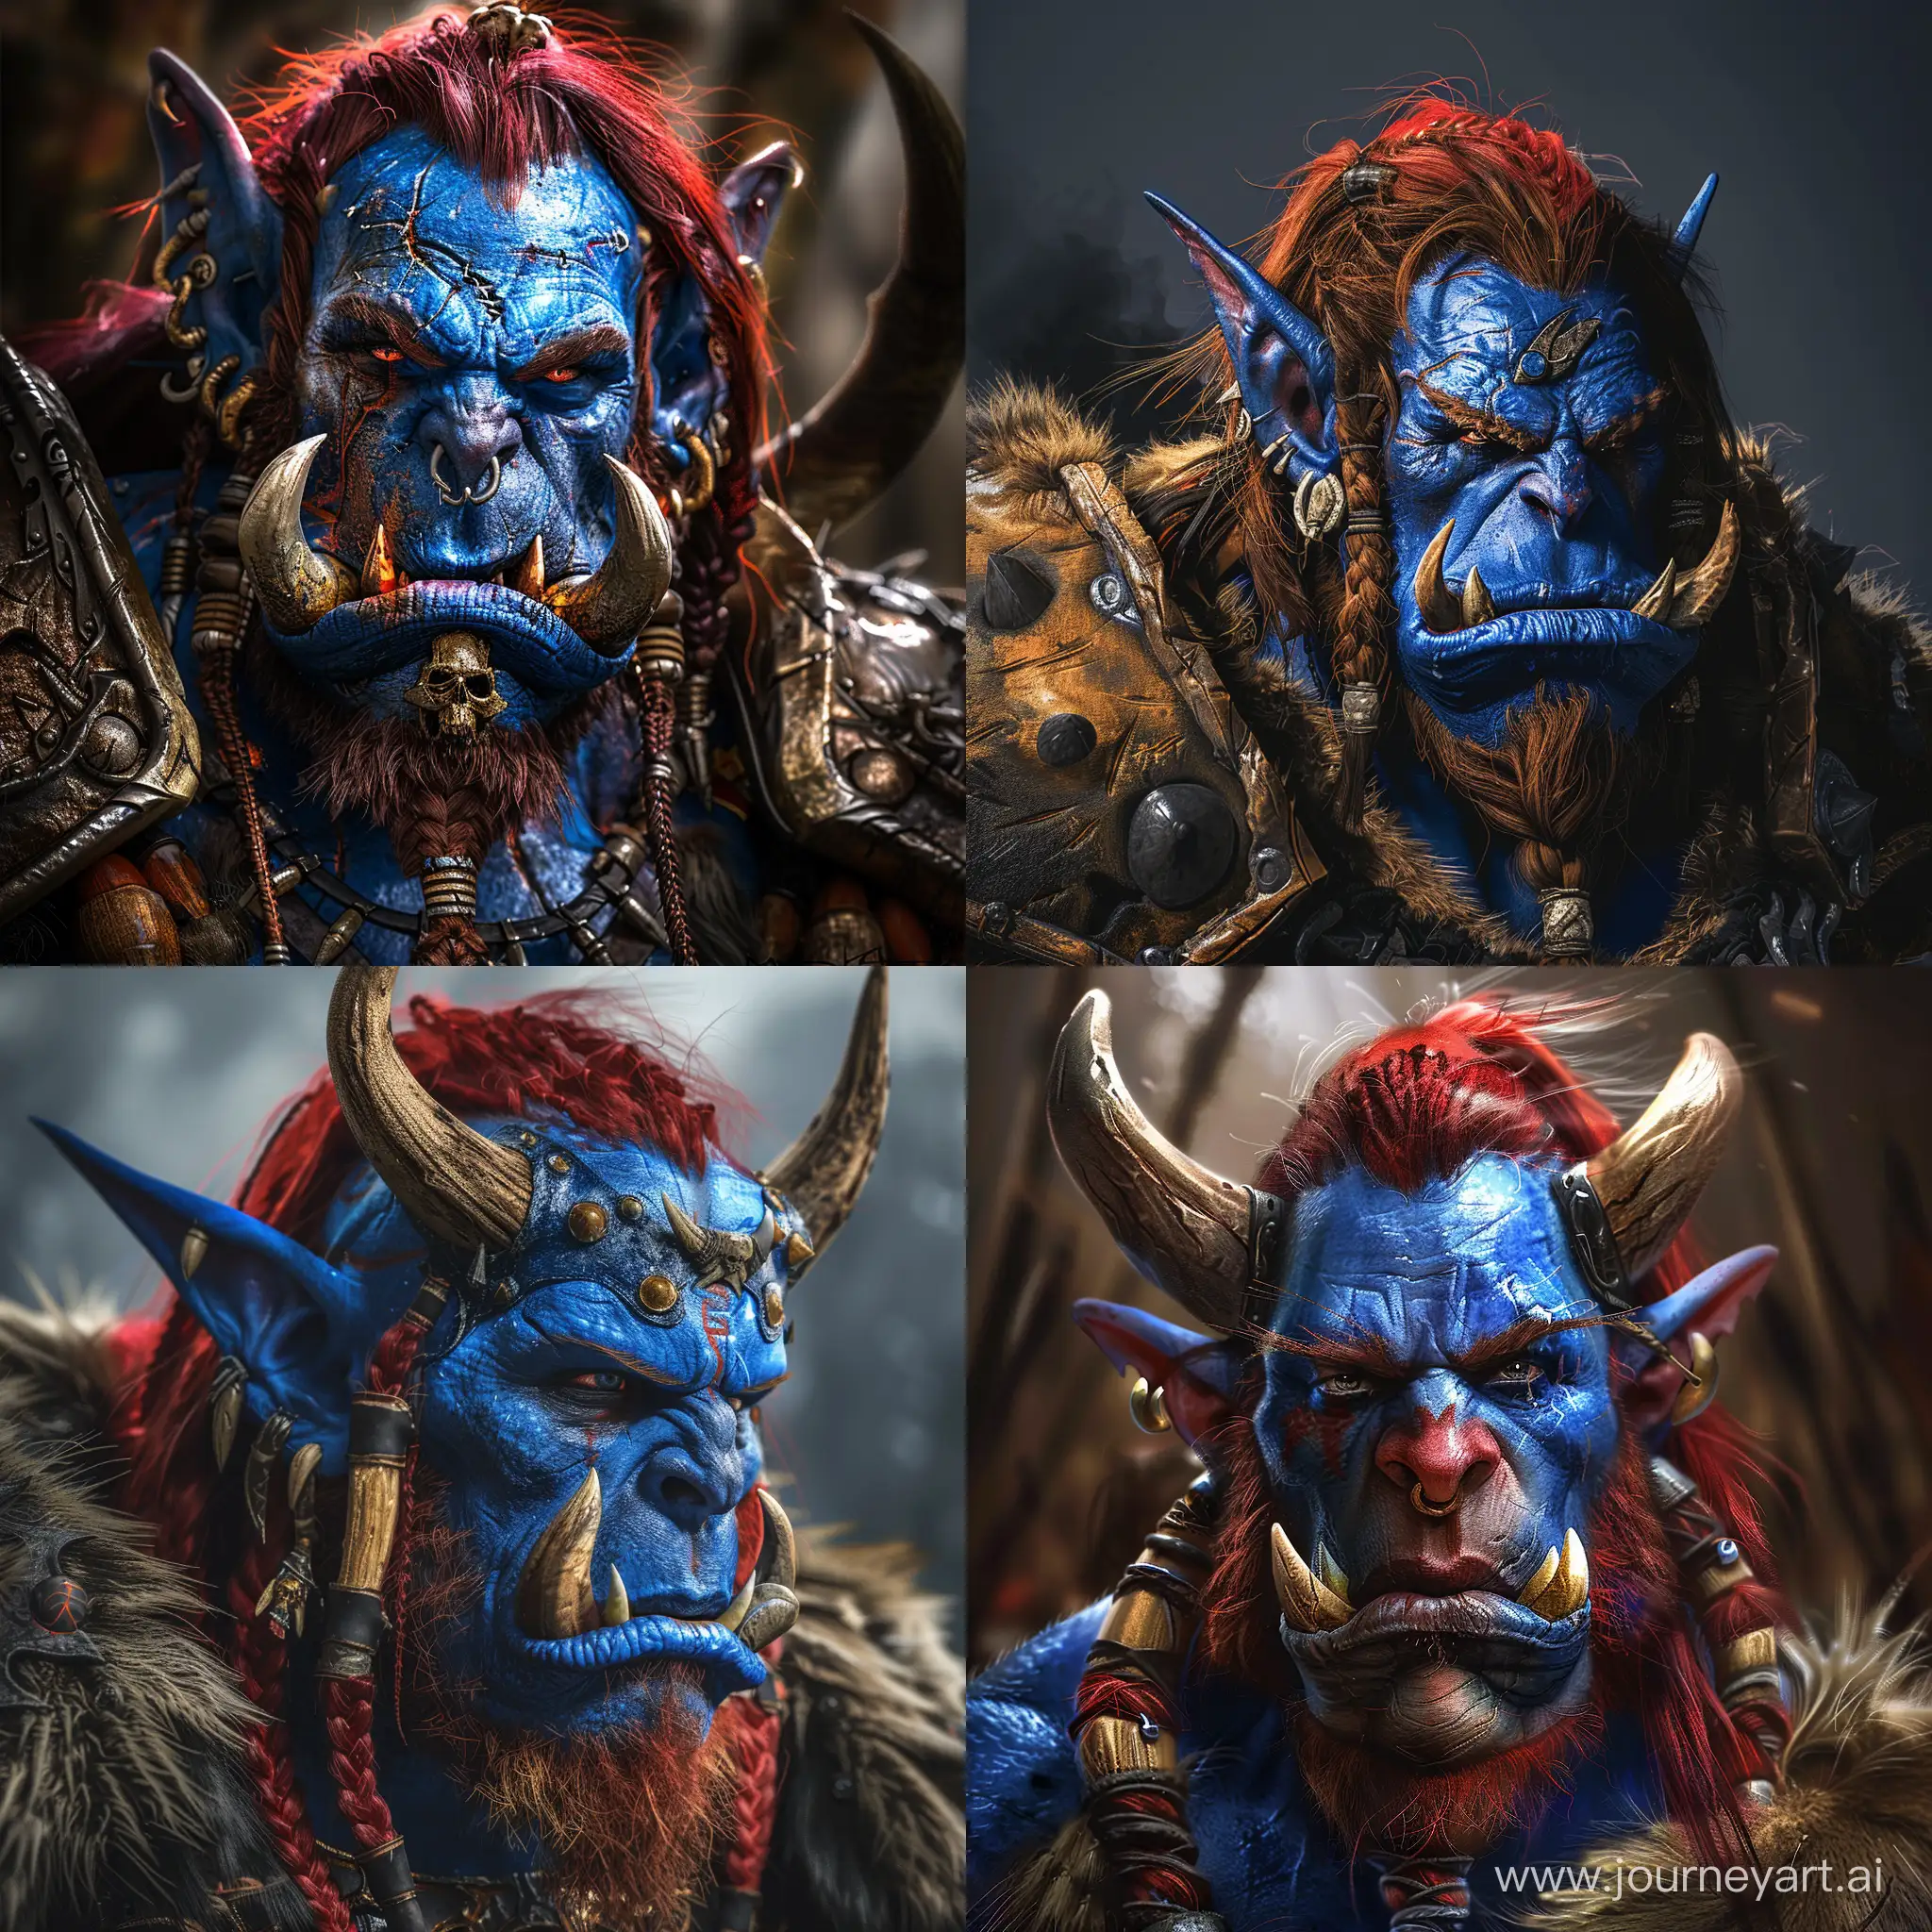 HighDetailed-Portrait-of-World-of-Warcrafts-Voljin-with-Blue-Skin-and-Red-Hair